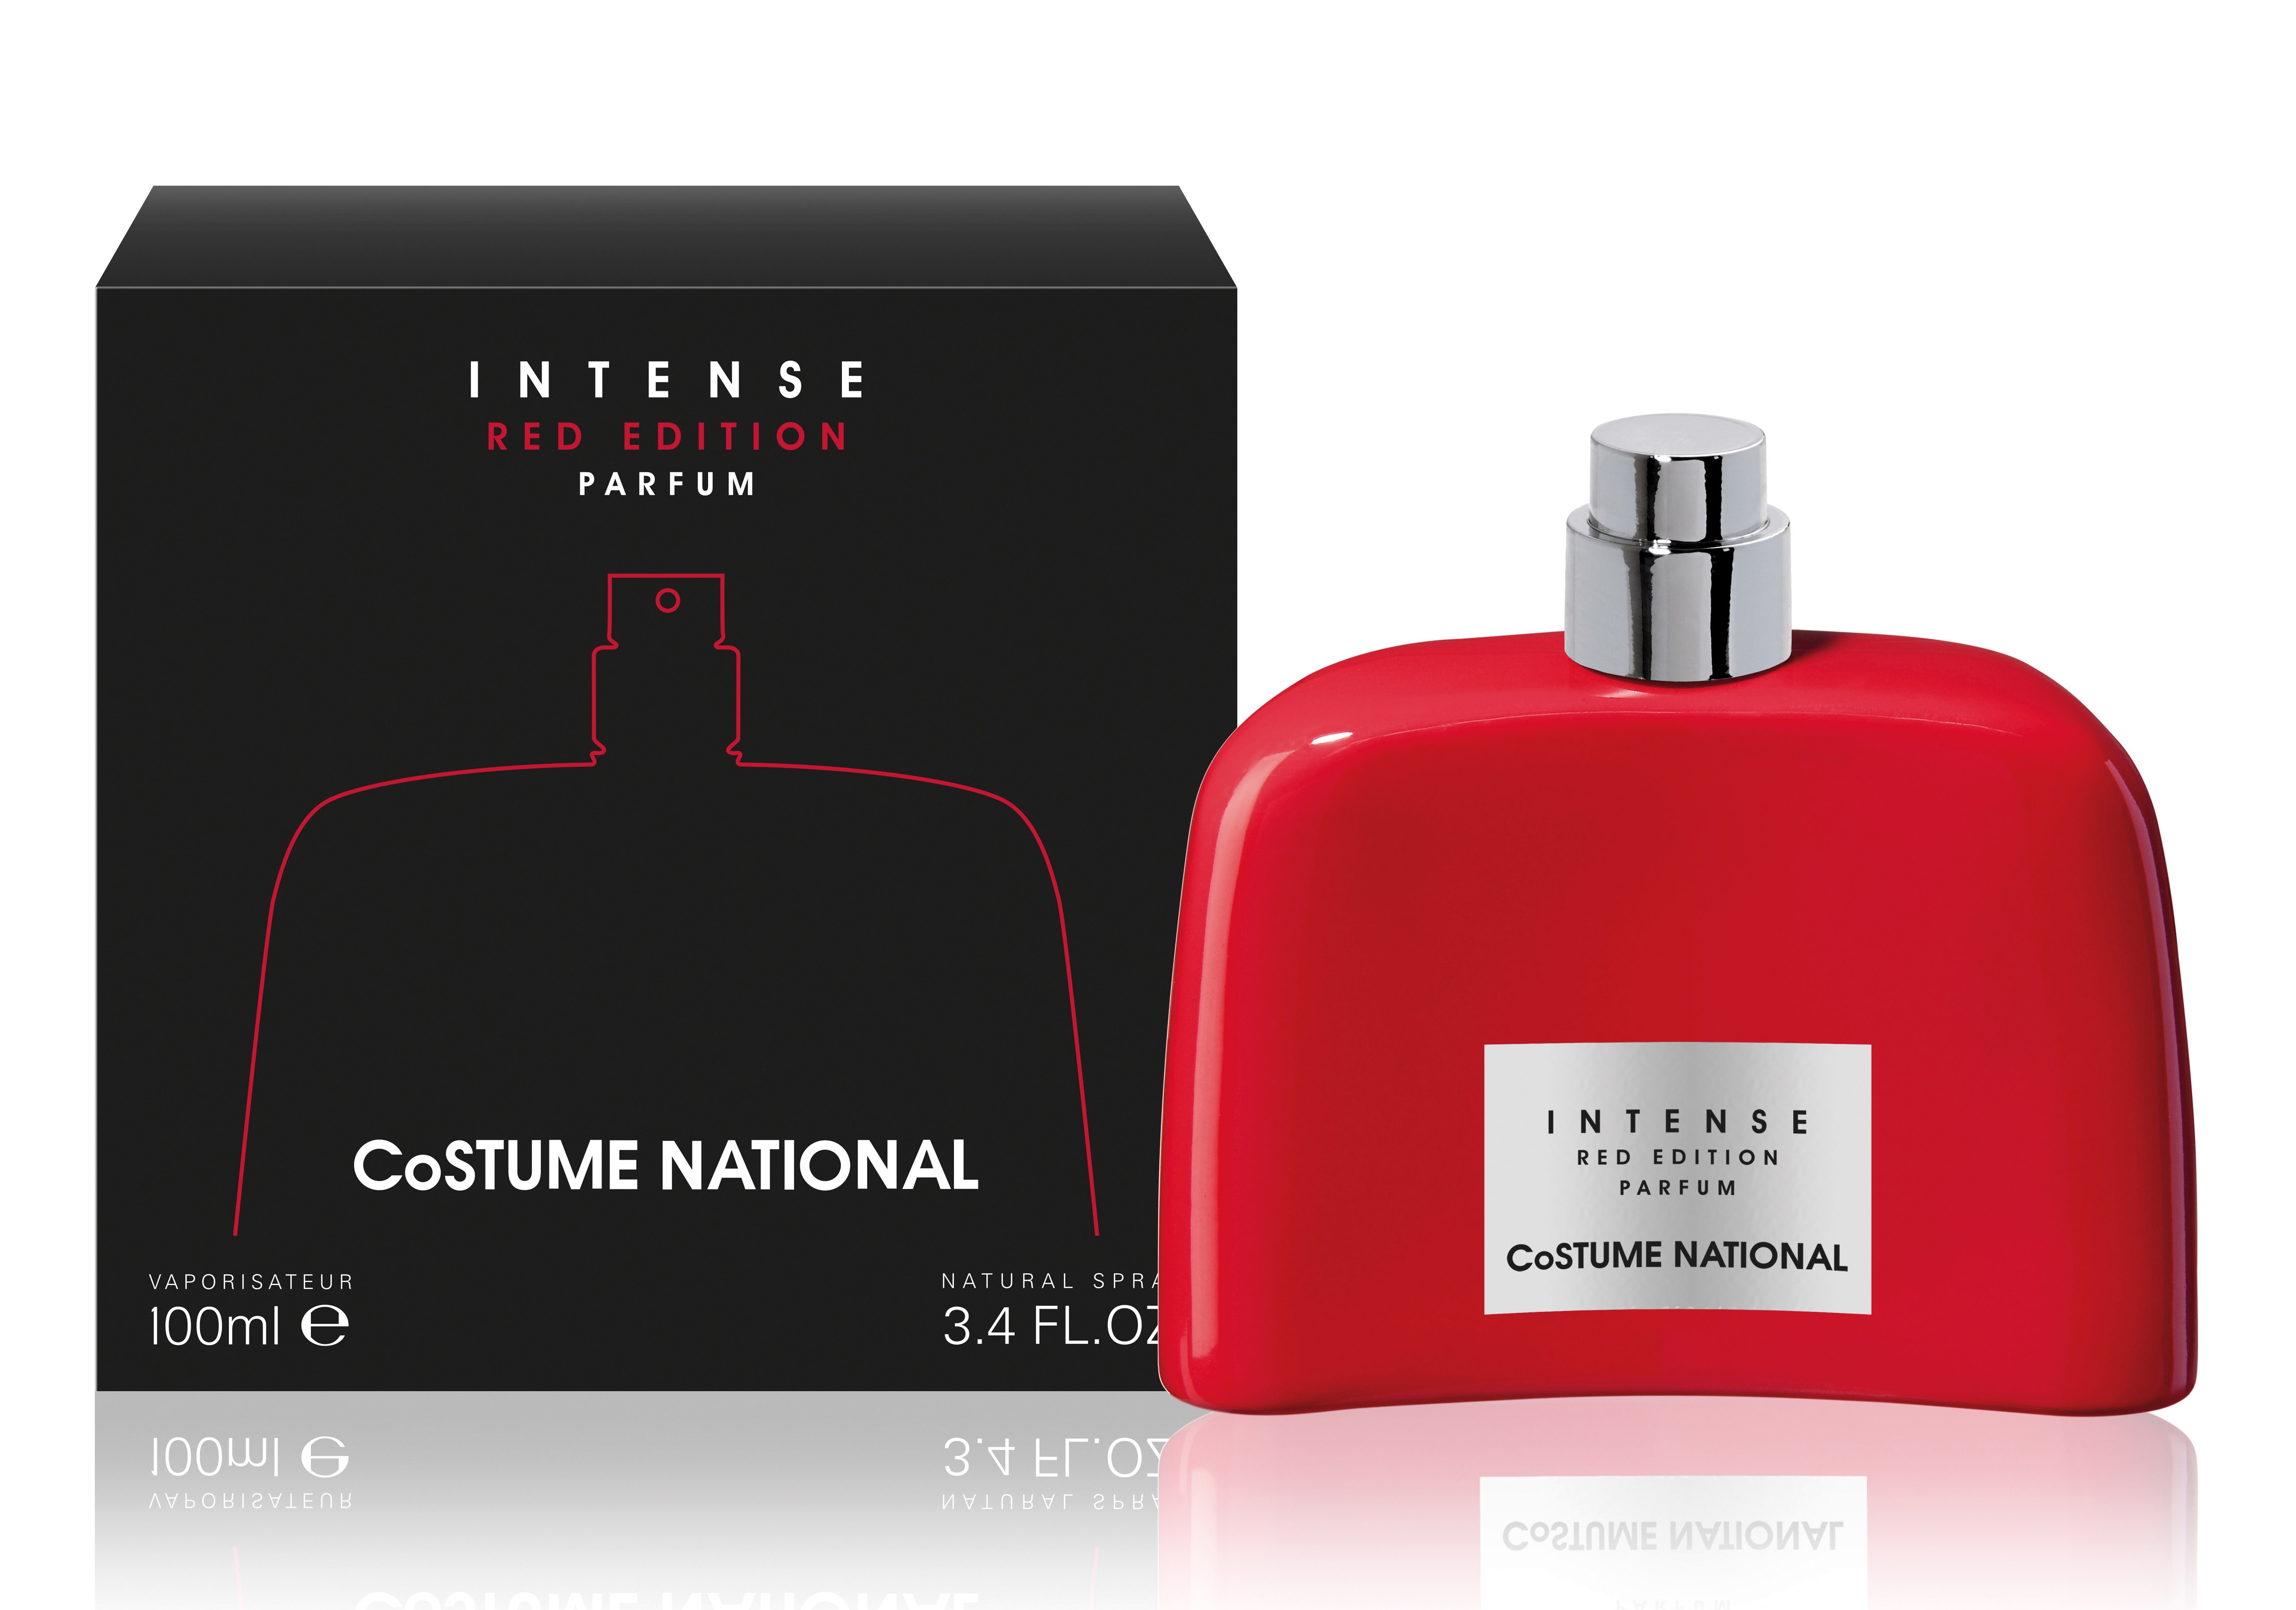 costume national scent 100ml